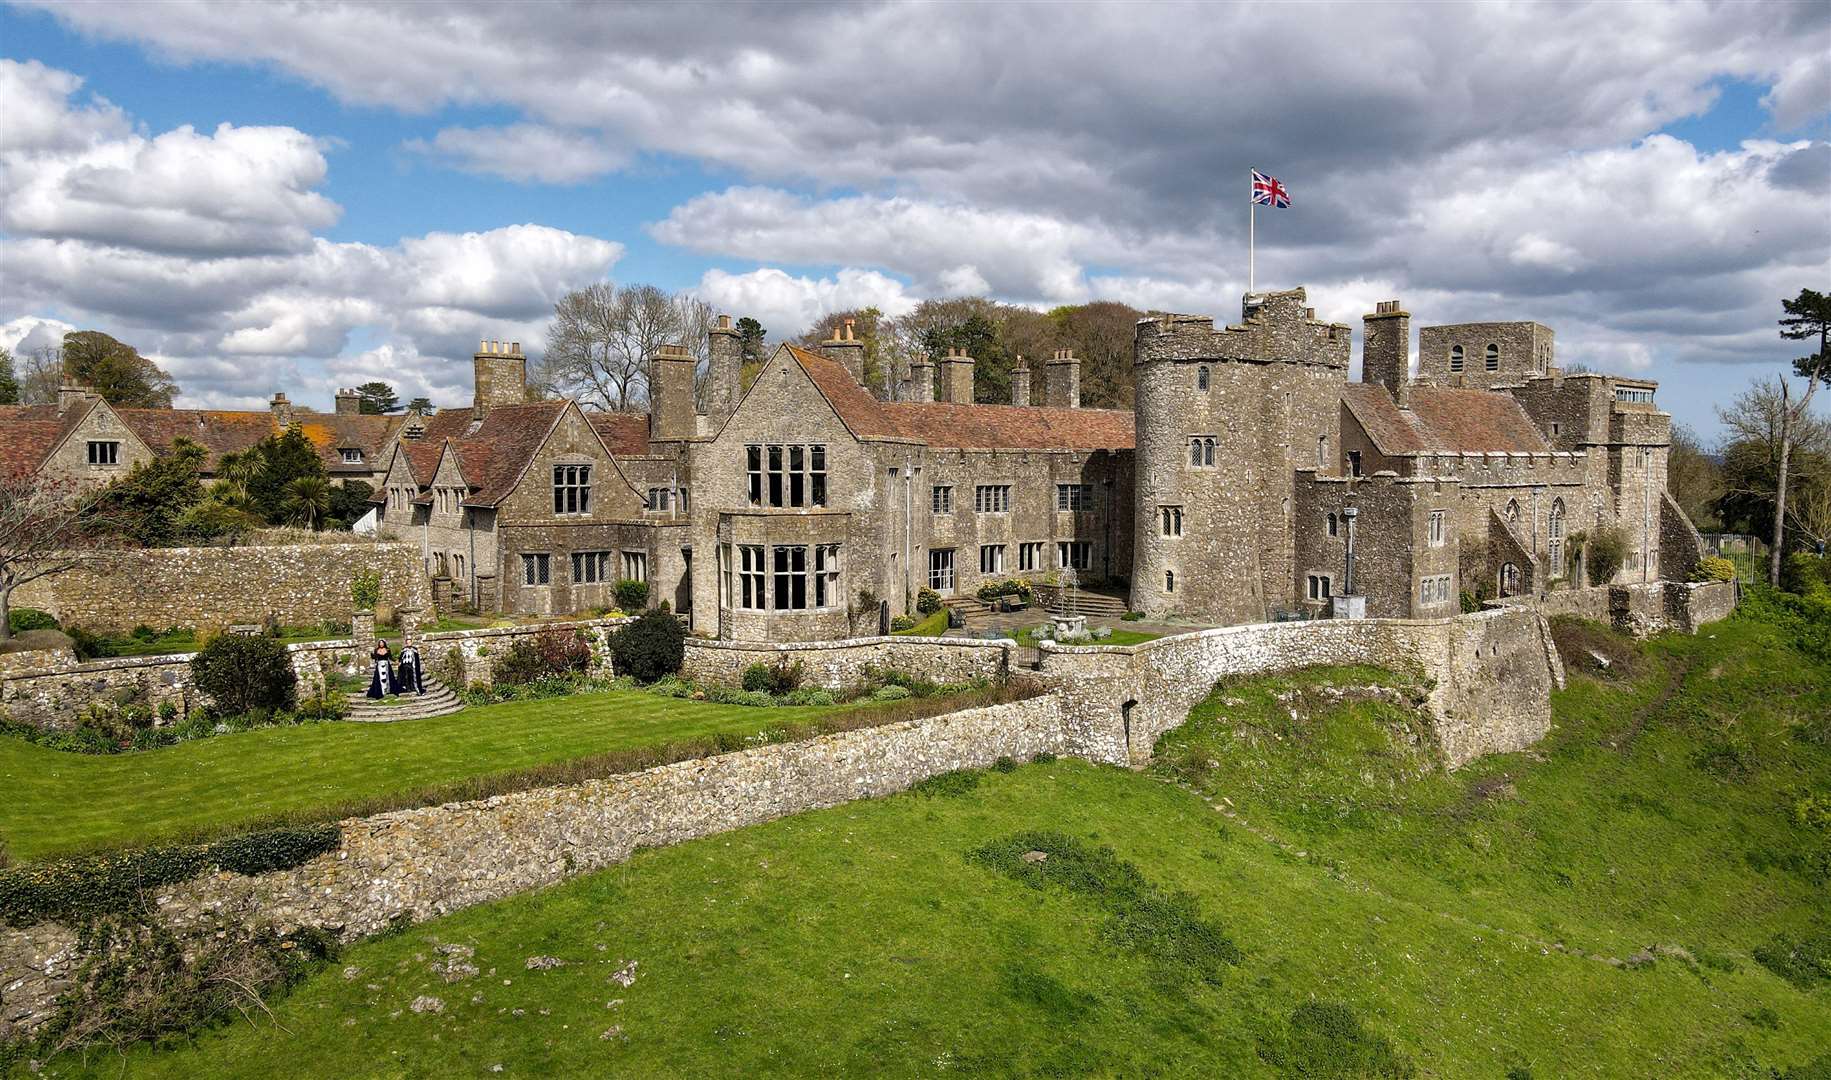 Lympne Castle went on the market originally for £15m and sold for £5.5m